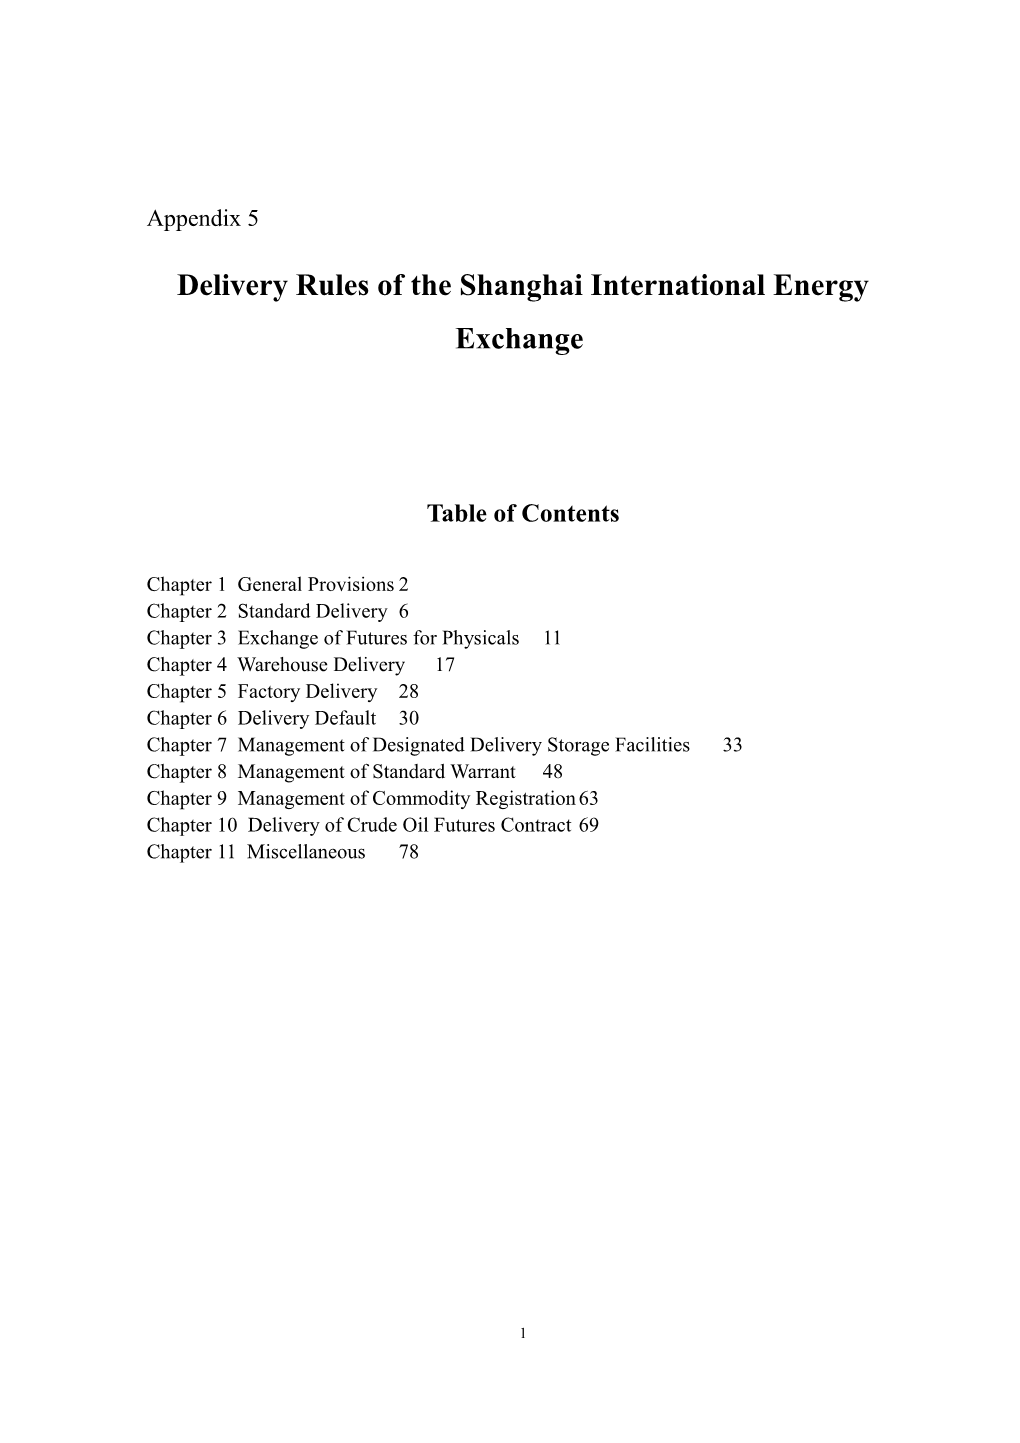 Delivery Rulesof the Shanghai International Energy Exchange